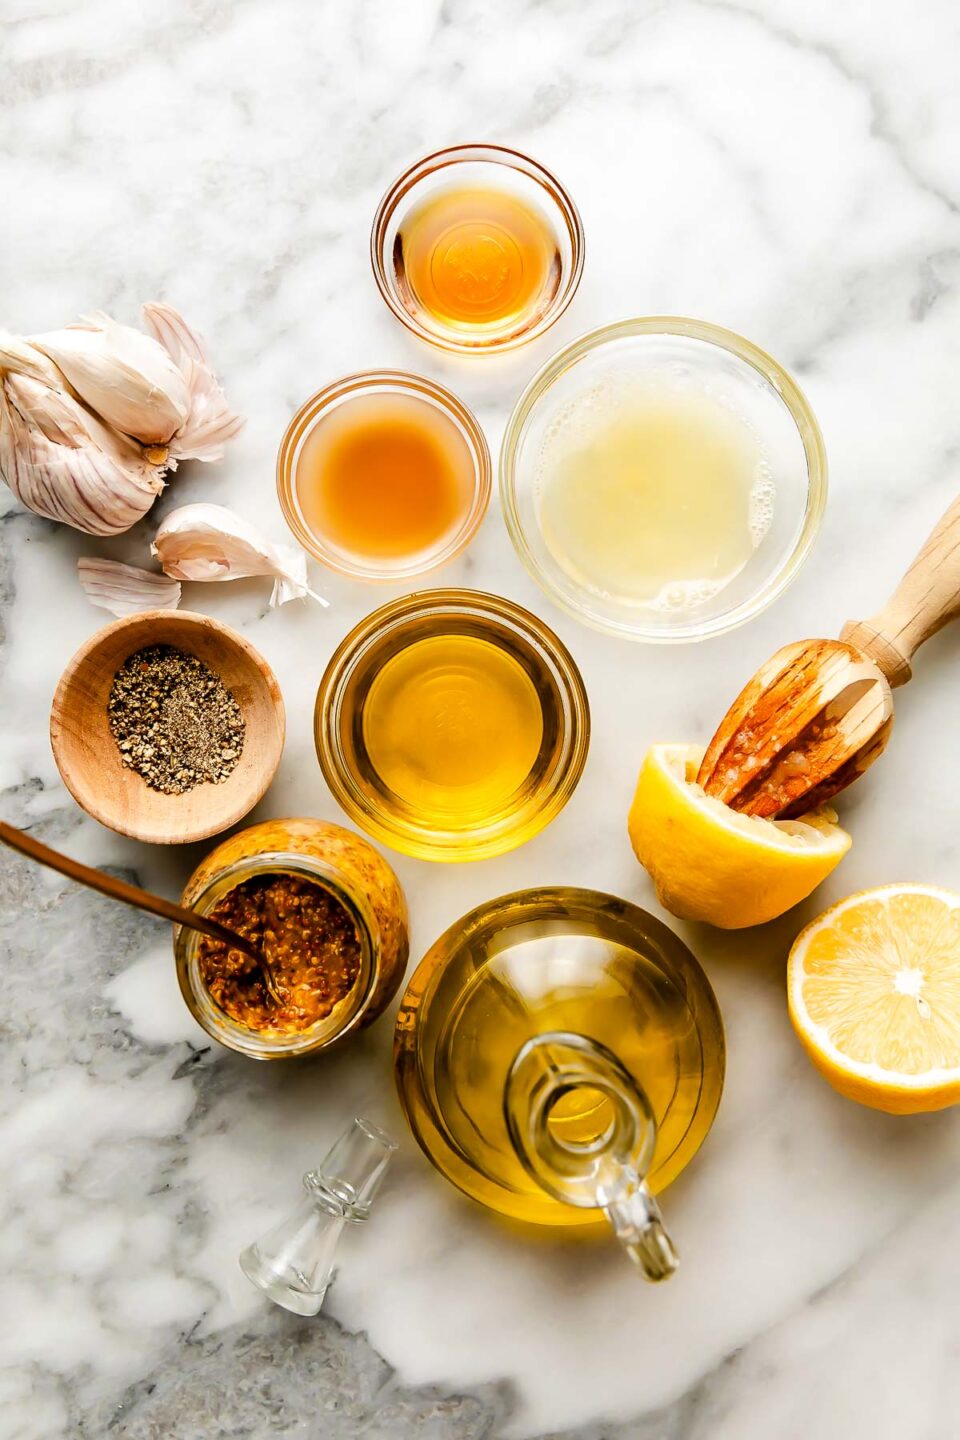 An overhead shot of ingredients displayed in small bowls and dishes on a white marbled surface: olive oil, whole grain mustard, apple cider vinegar, lemon juice, a juiced lemon, garlic, black pepper and maple syrup.